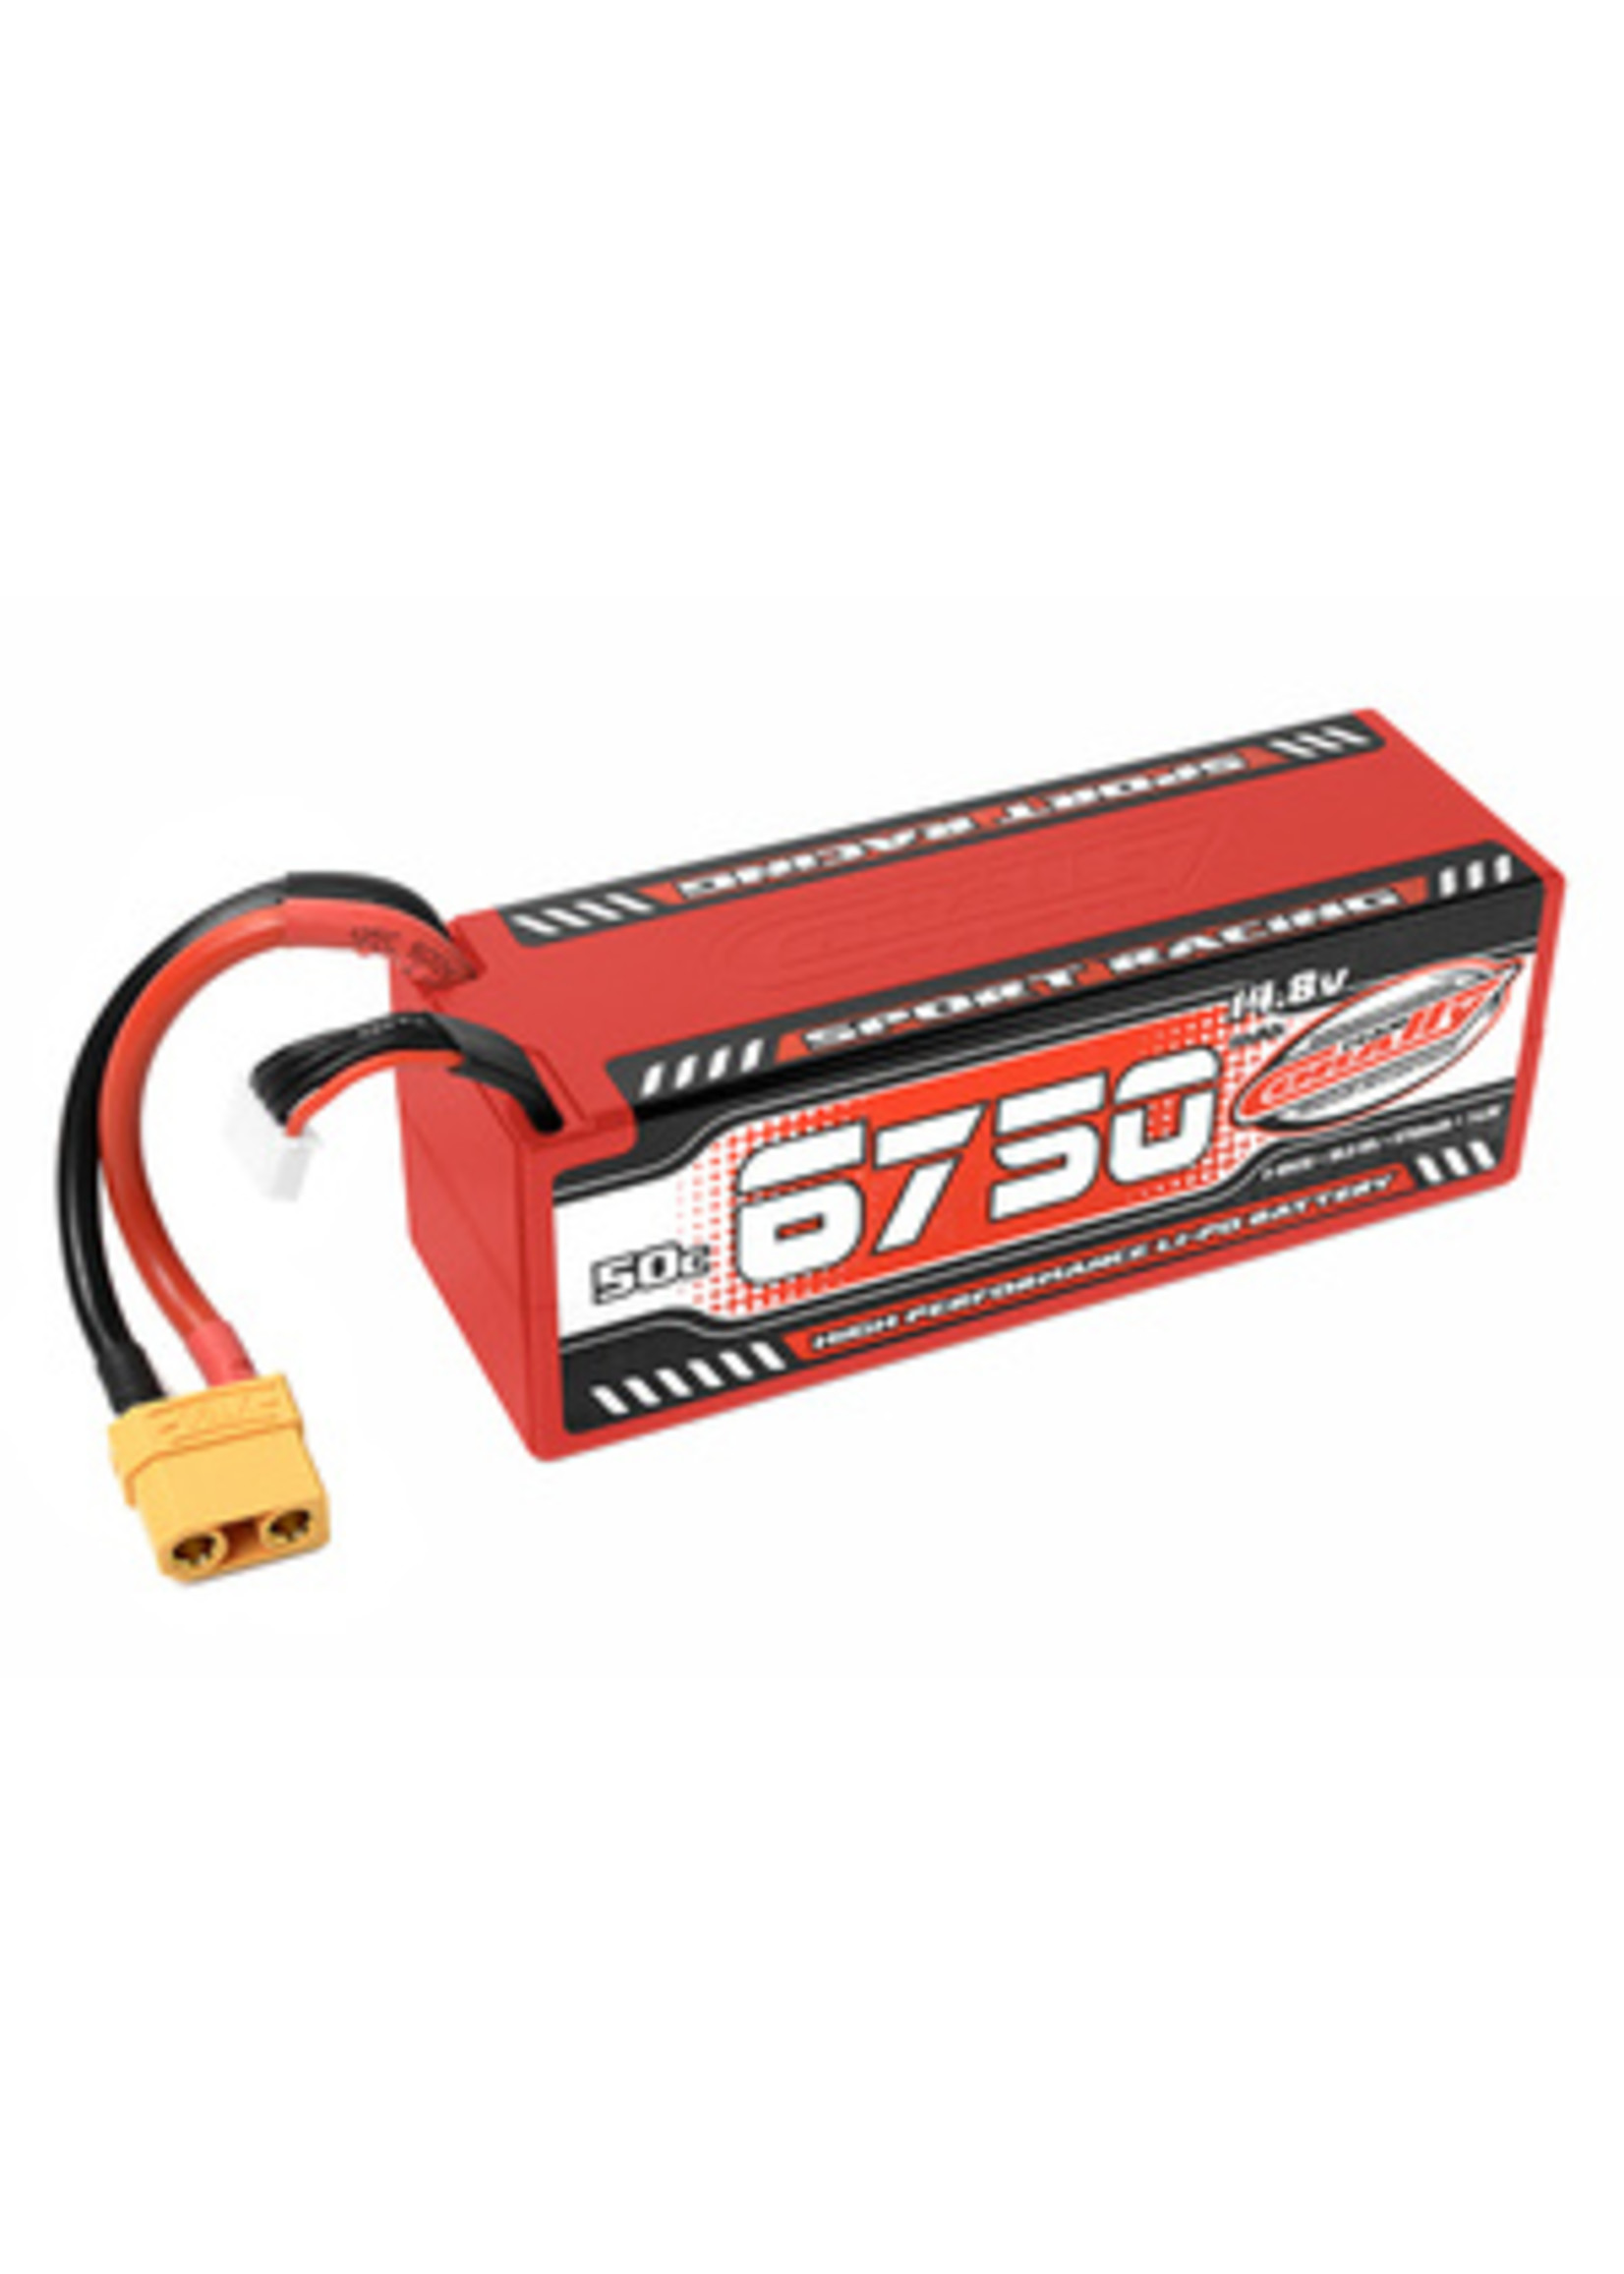 Team Corally COR49430 Team Corally 6750mAh 14.8v 4S 50C Hardcase Sport Racing LiPo Battery with Hardwired XT90 Connector